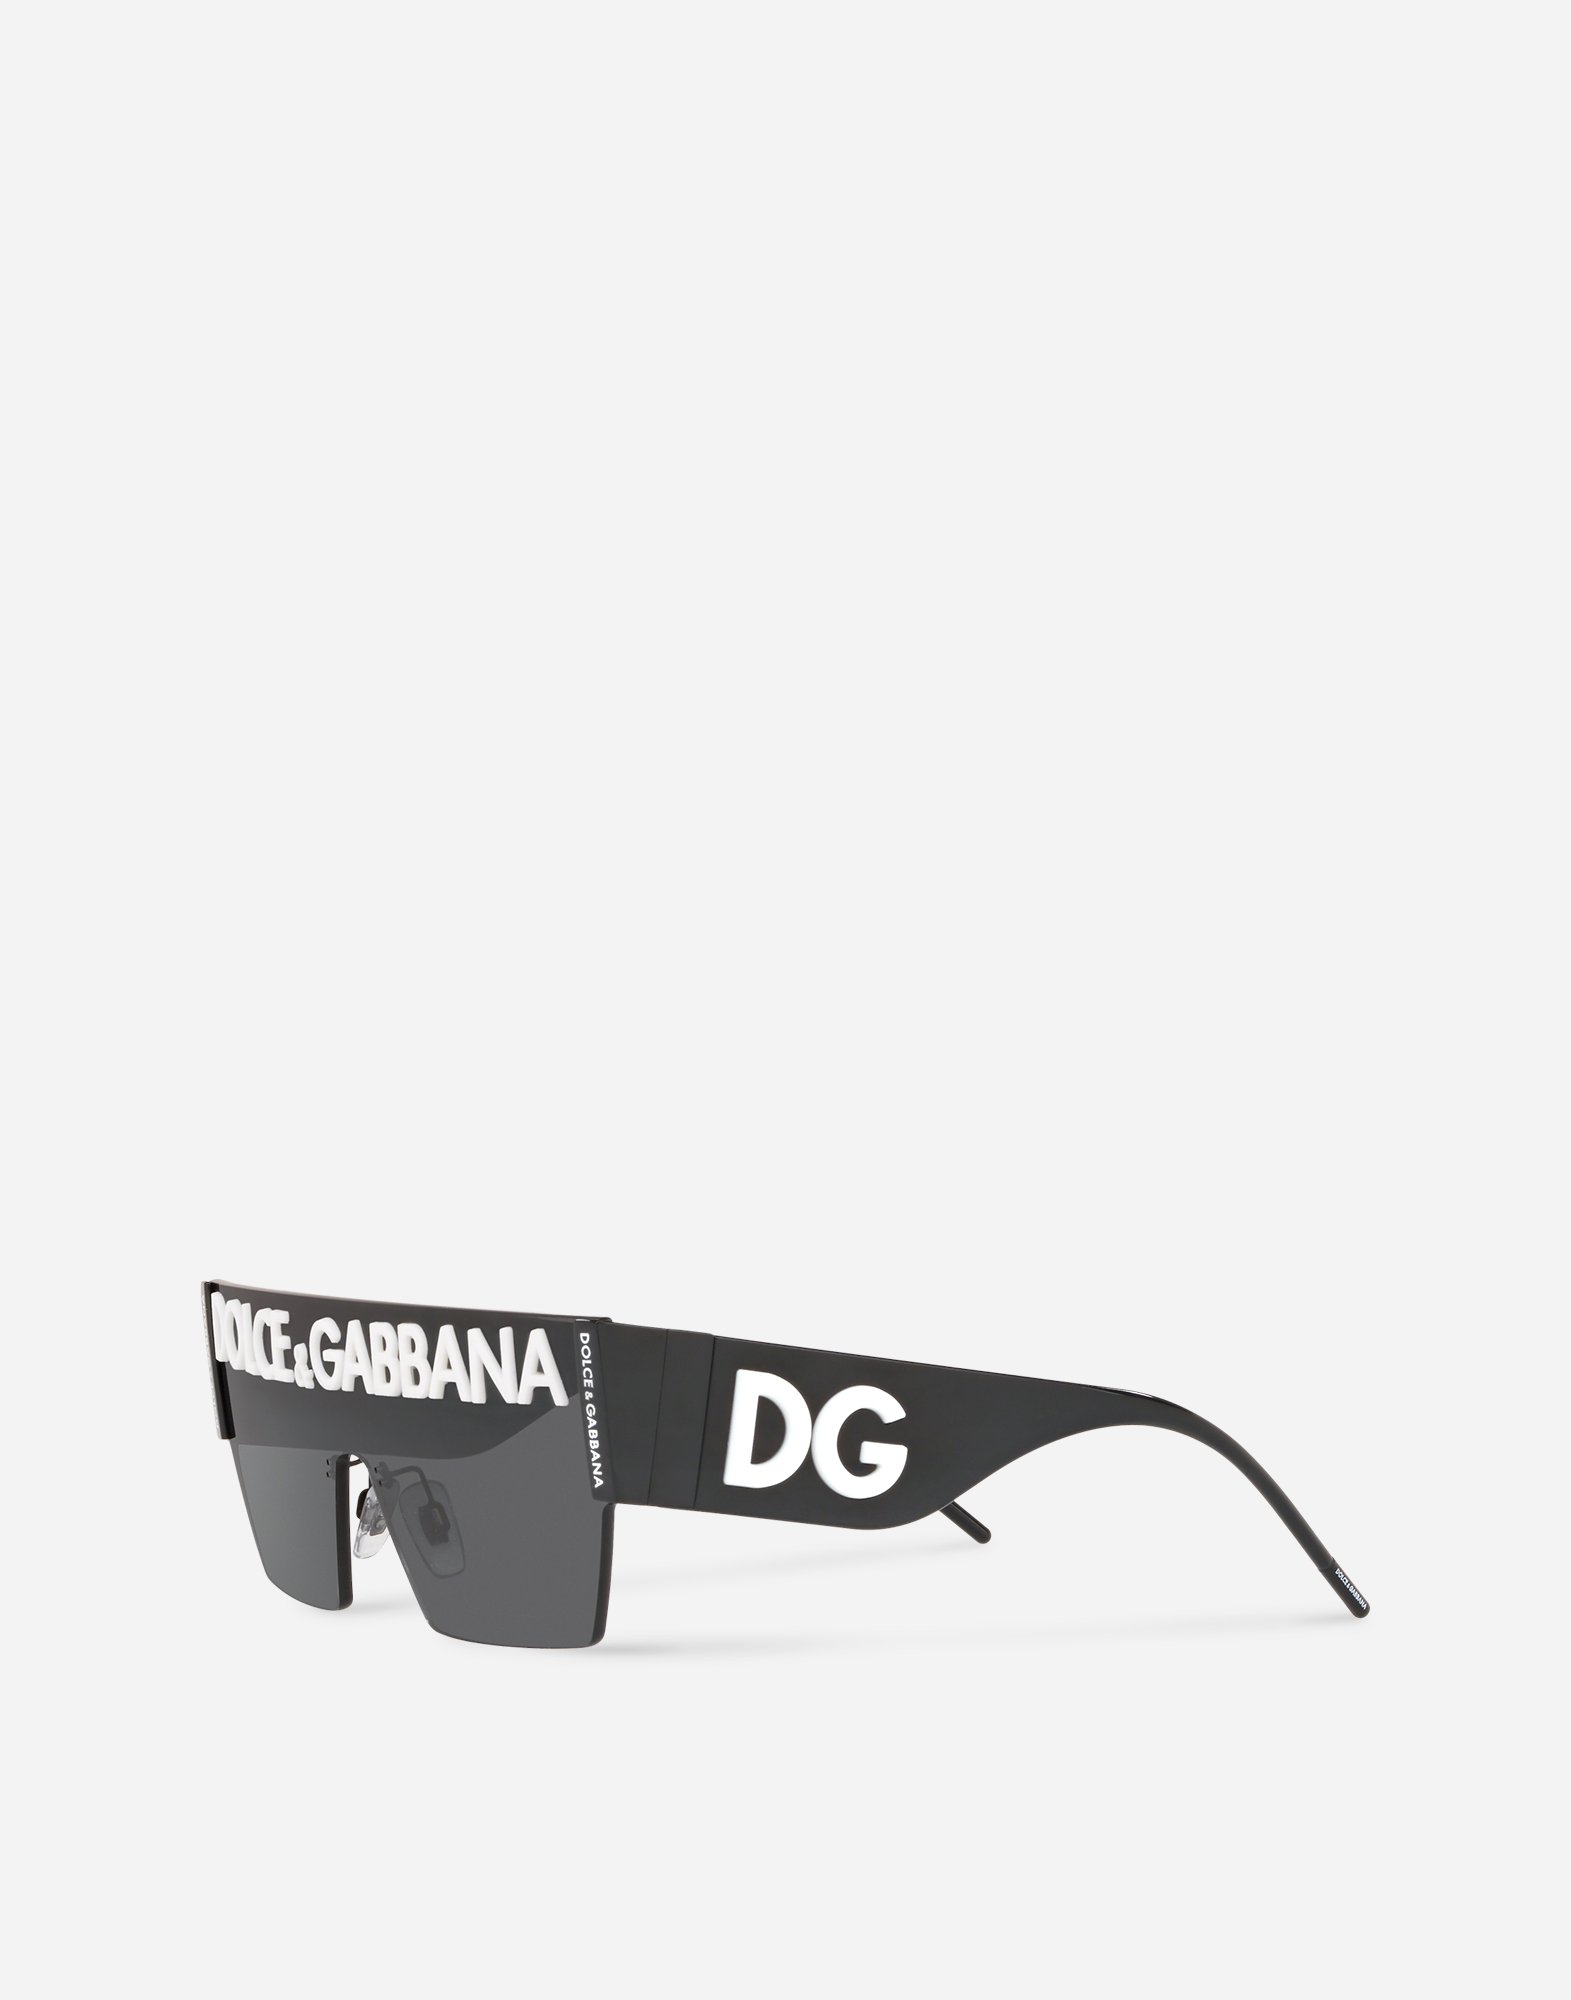 dolce and gabbana sunglasses made in china